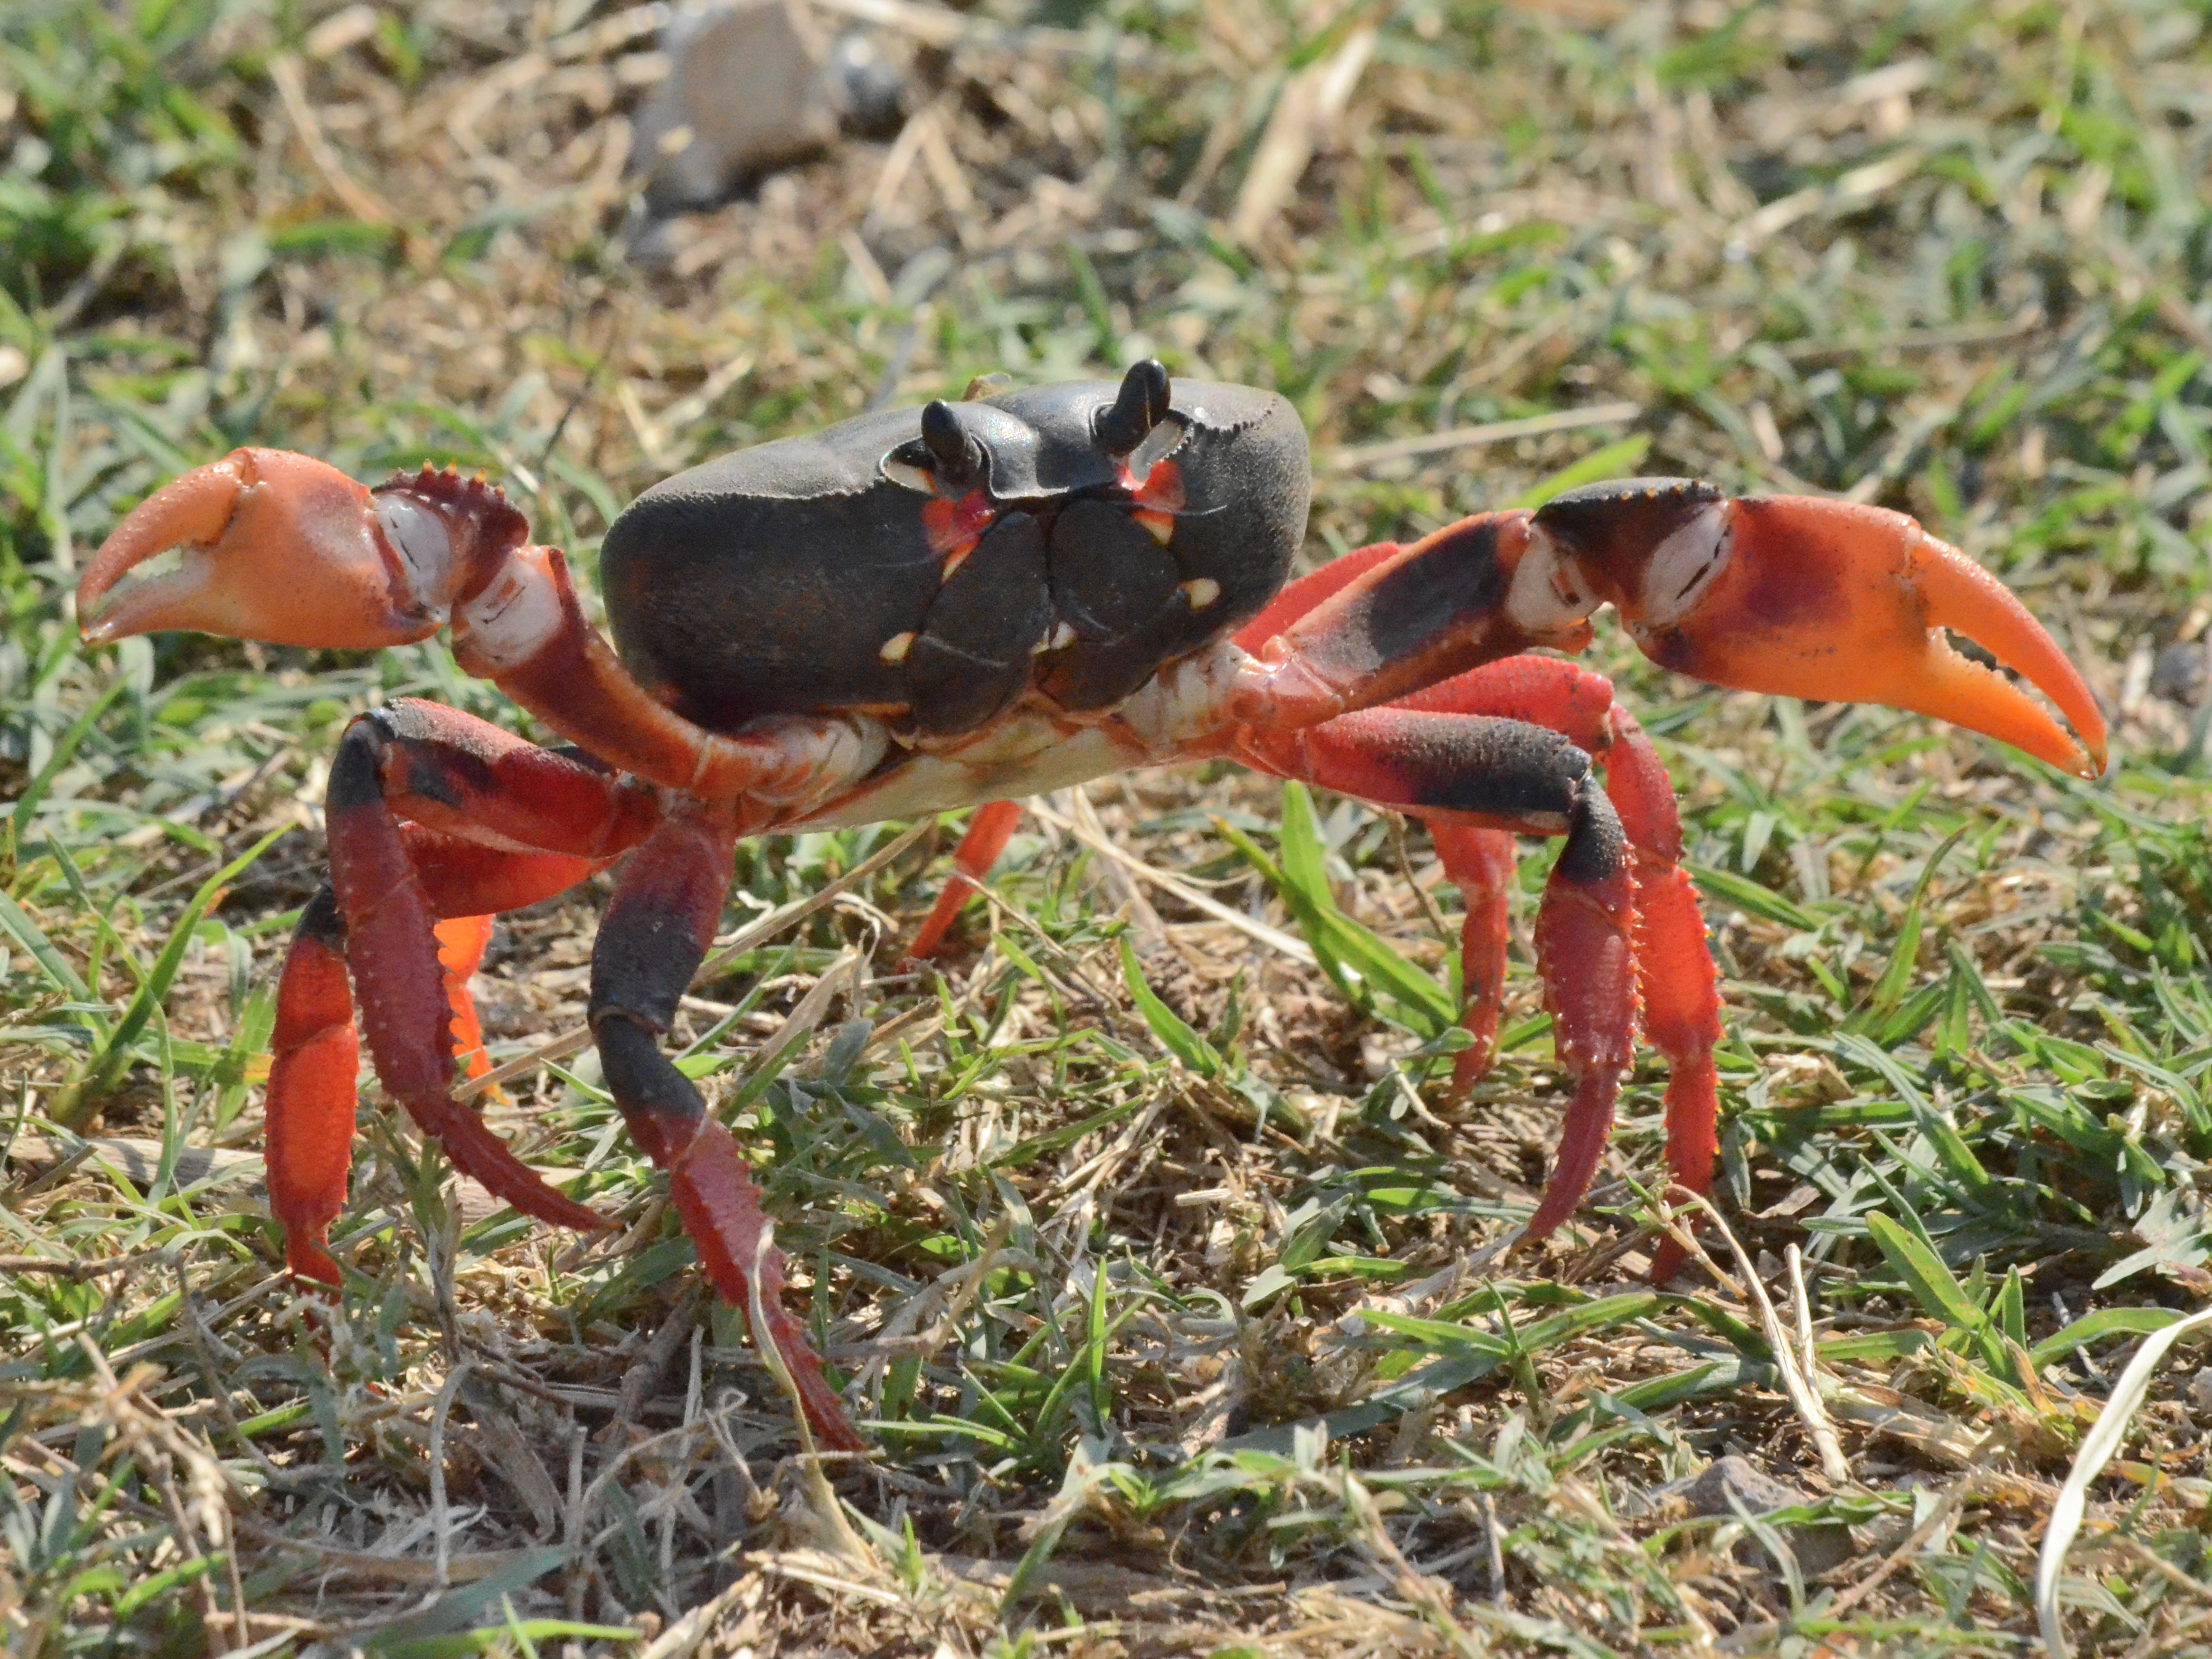 Click picture to see more Land Crabs.